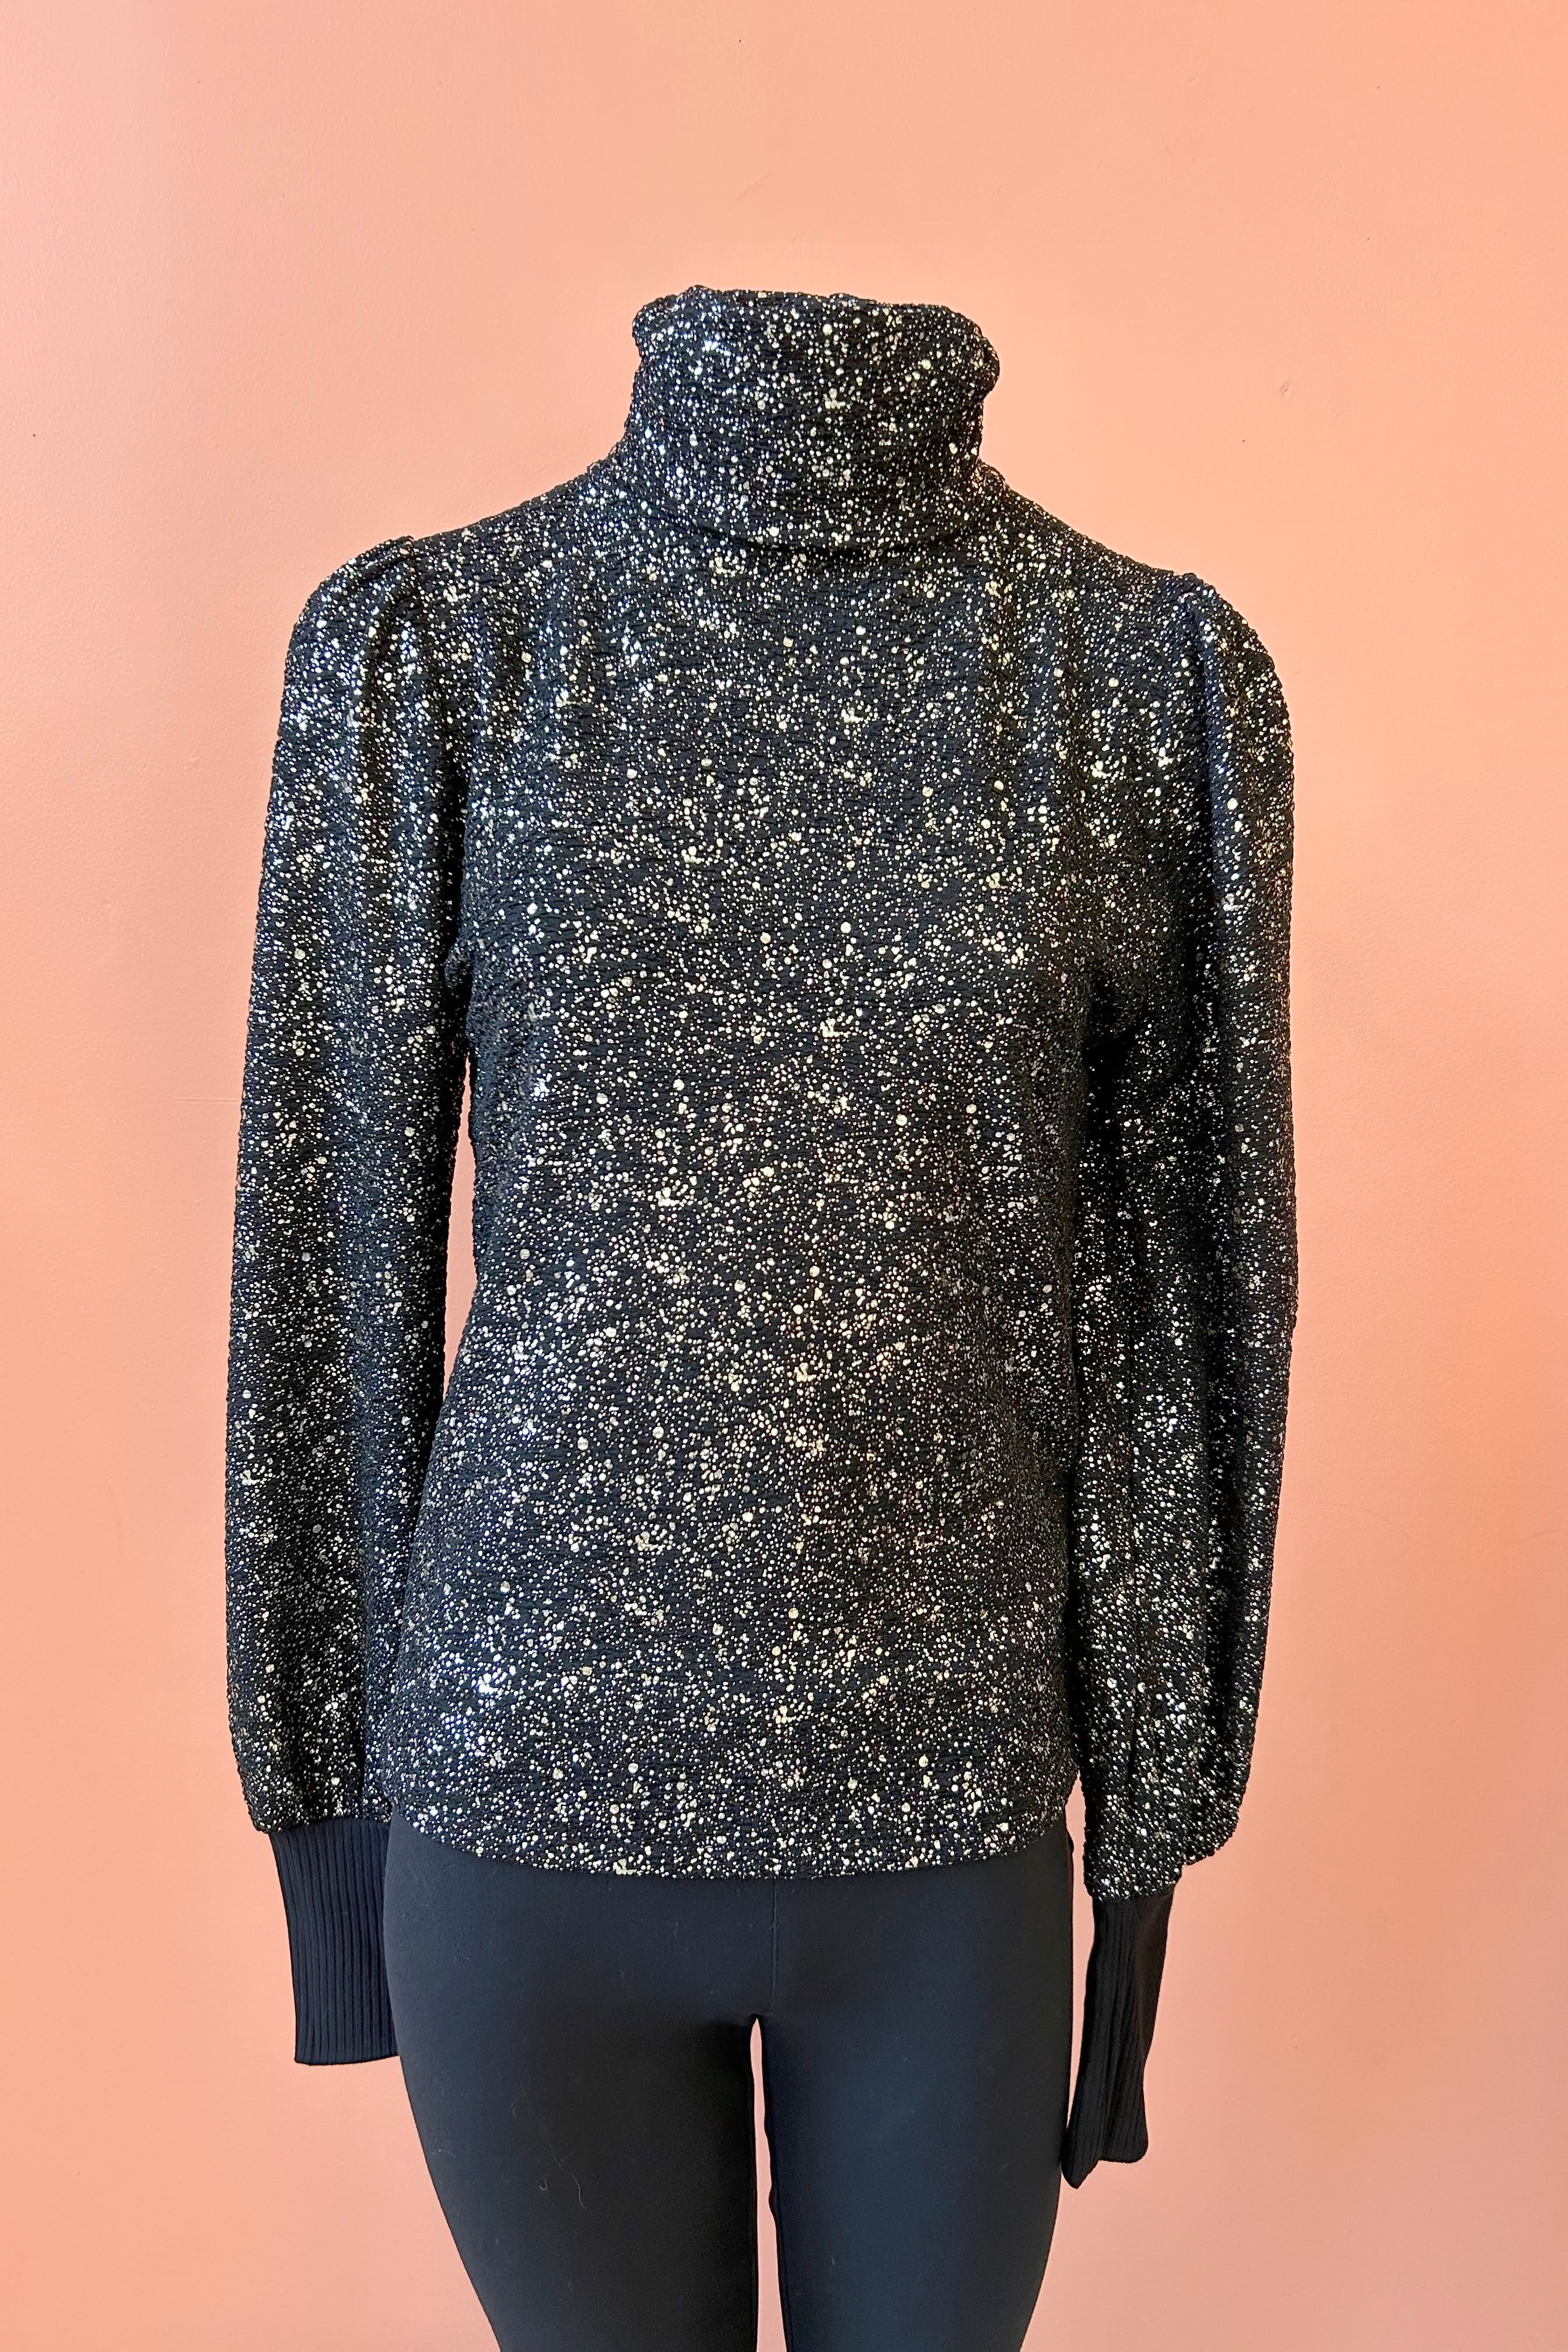 Turtleneck Top by Misstery, Sparkle, high neck, puffed sleeves with gathered cuffs, sizes S to XL, made in Toronto 